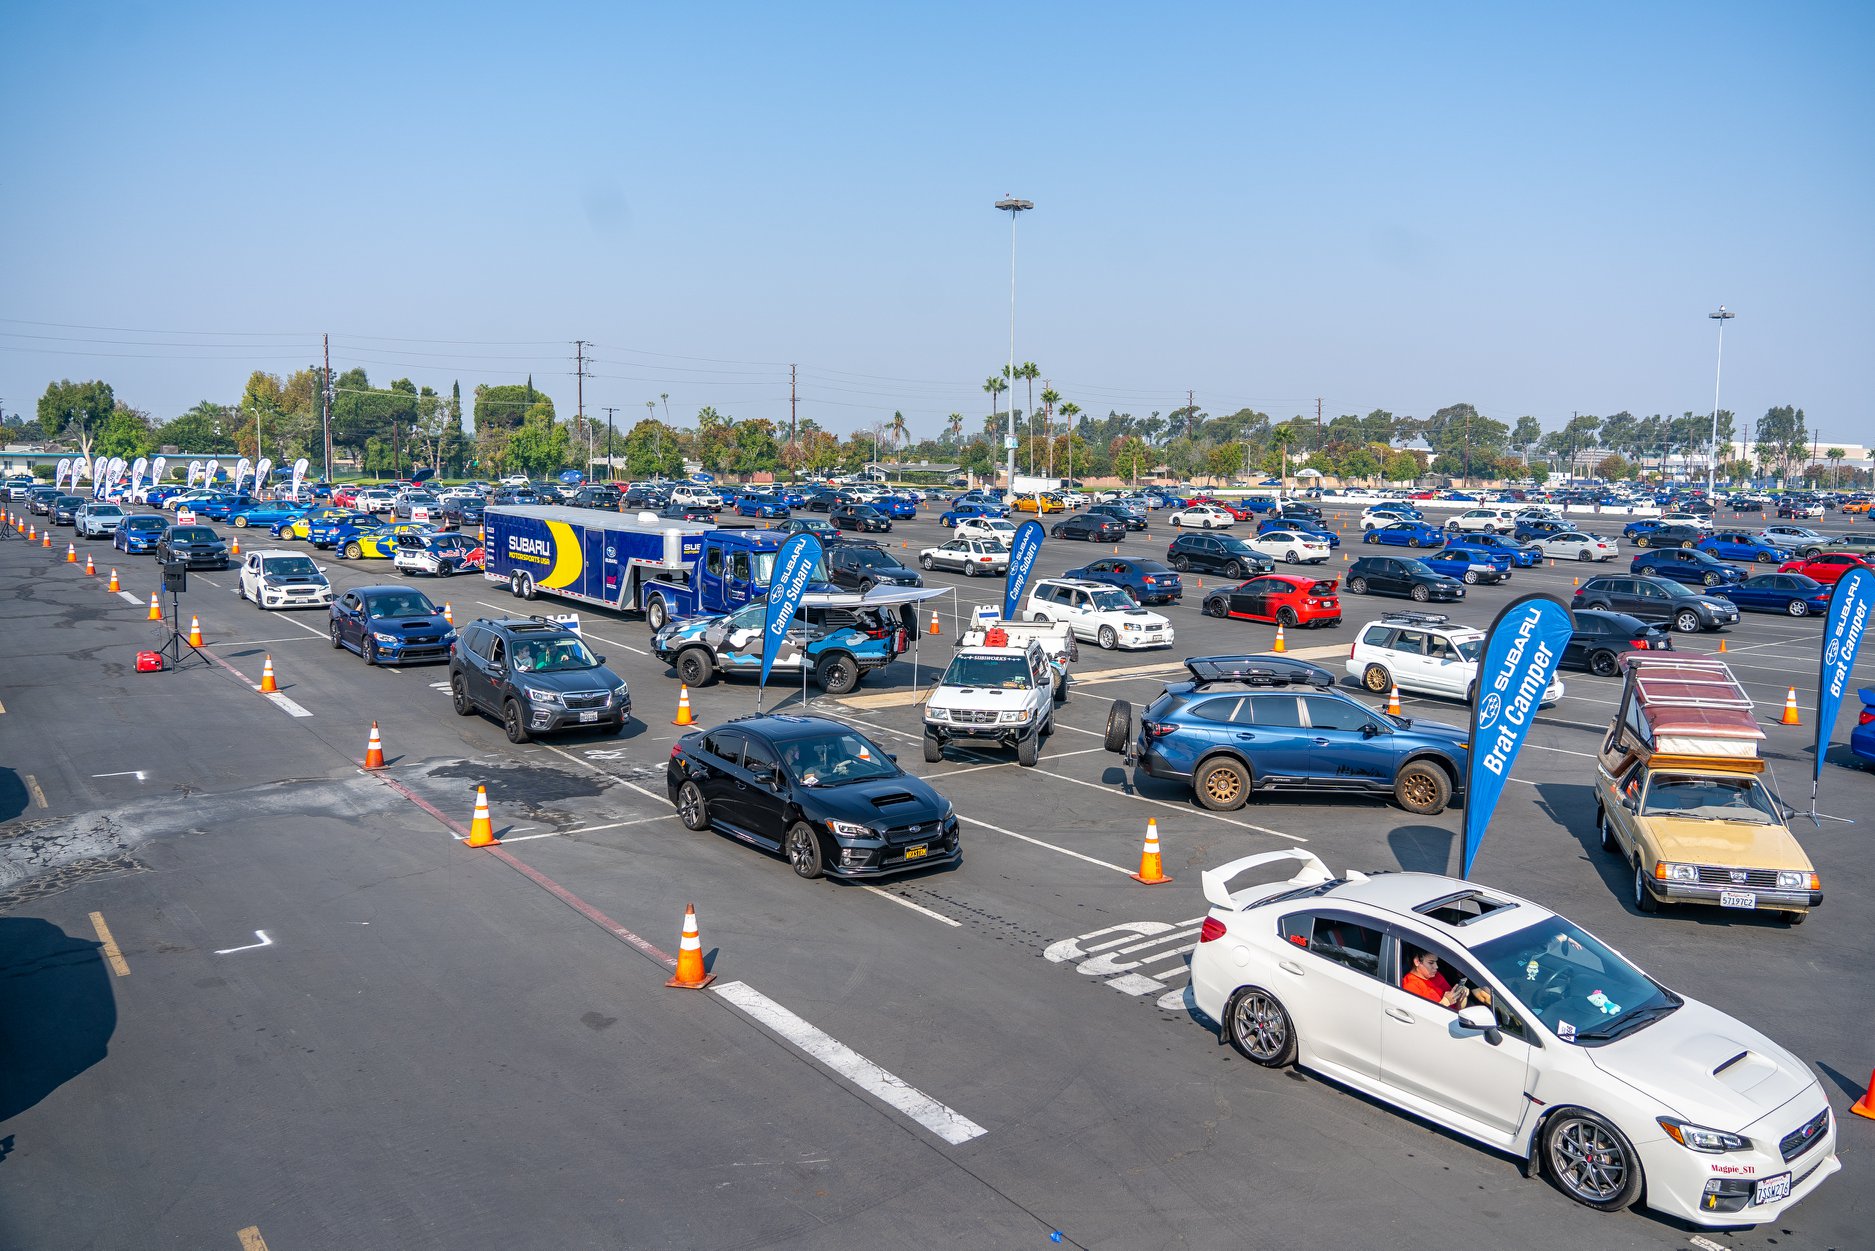 Subaru Makes Record Attempt for Largest Parade of Same-Make Vehicles | THE SHOP